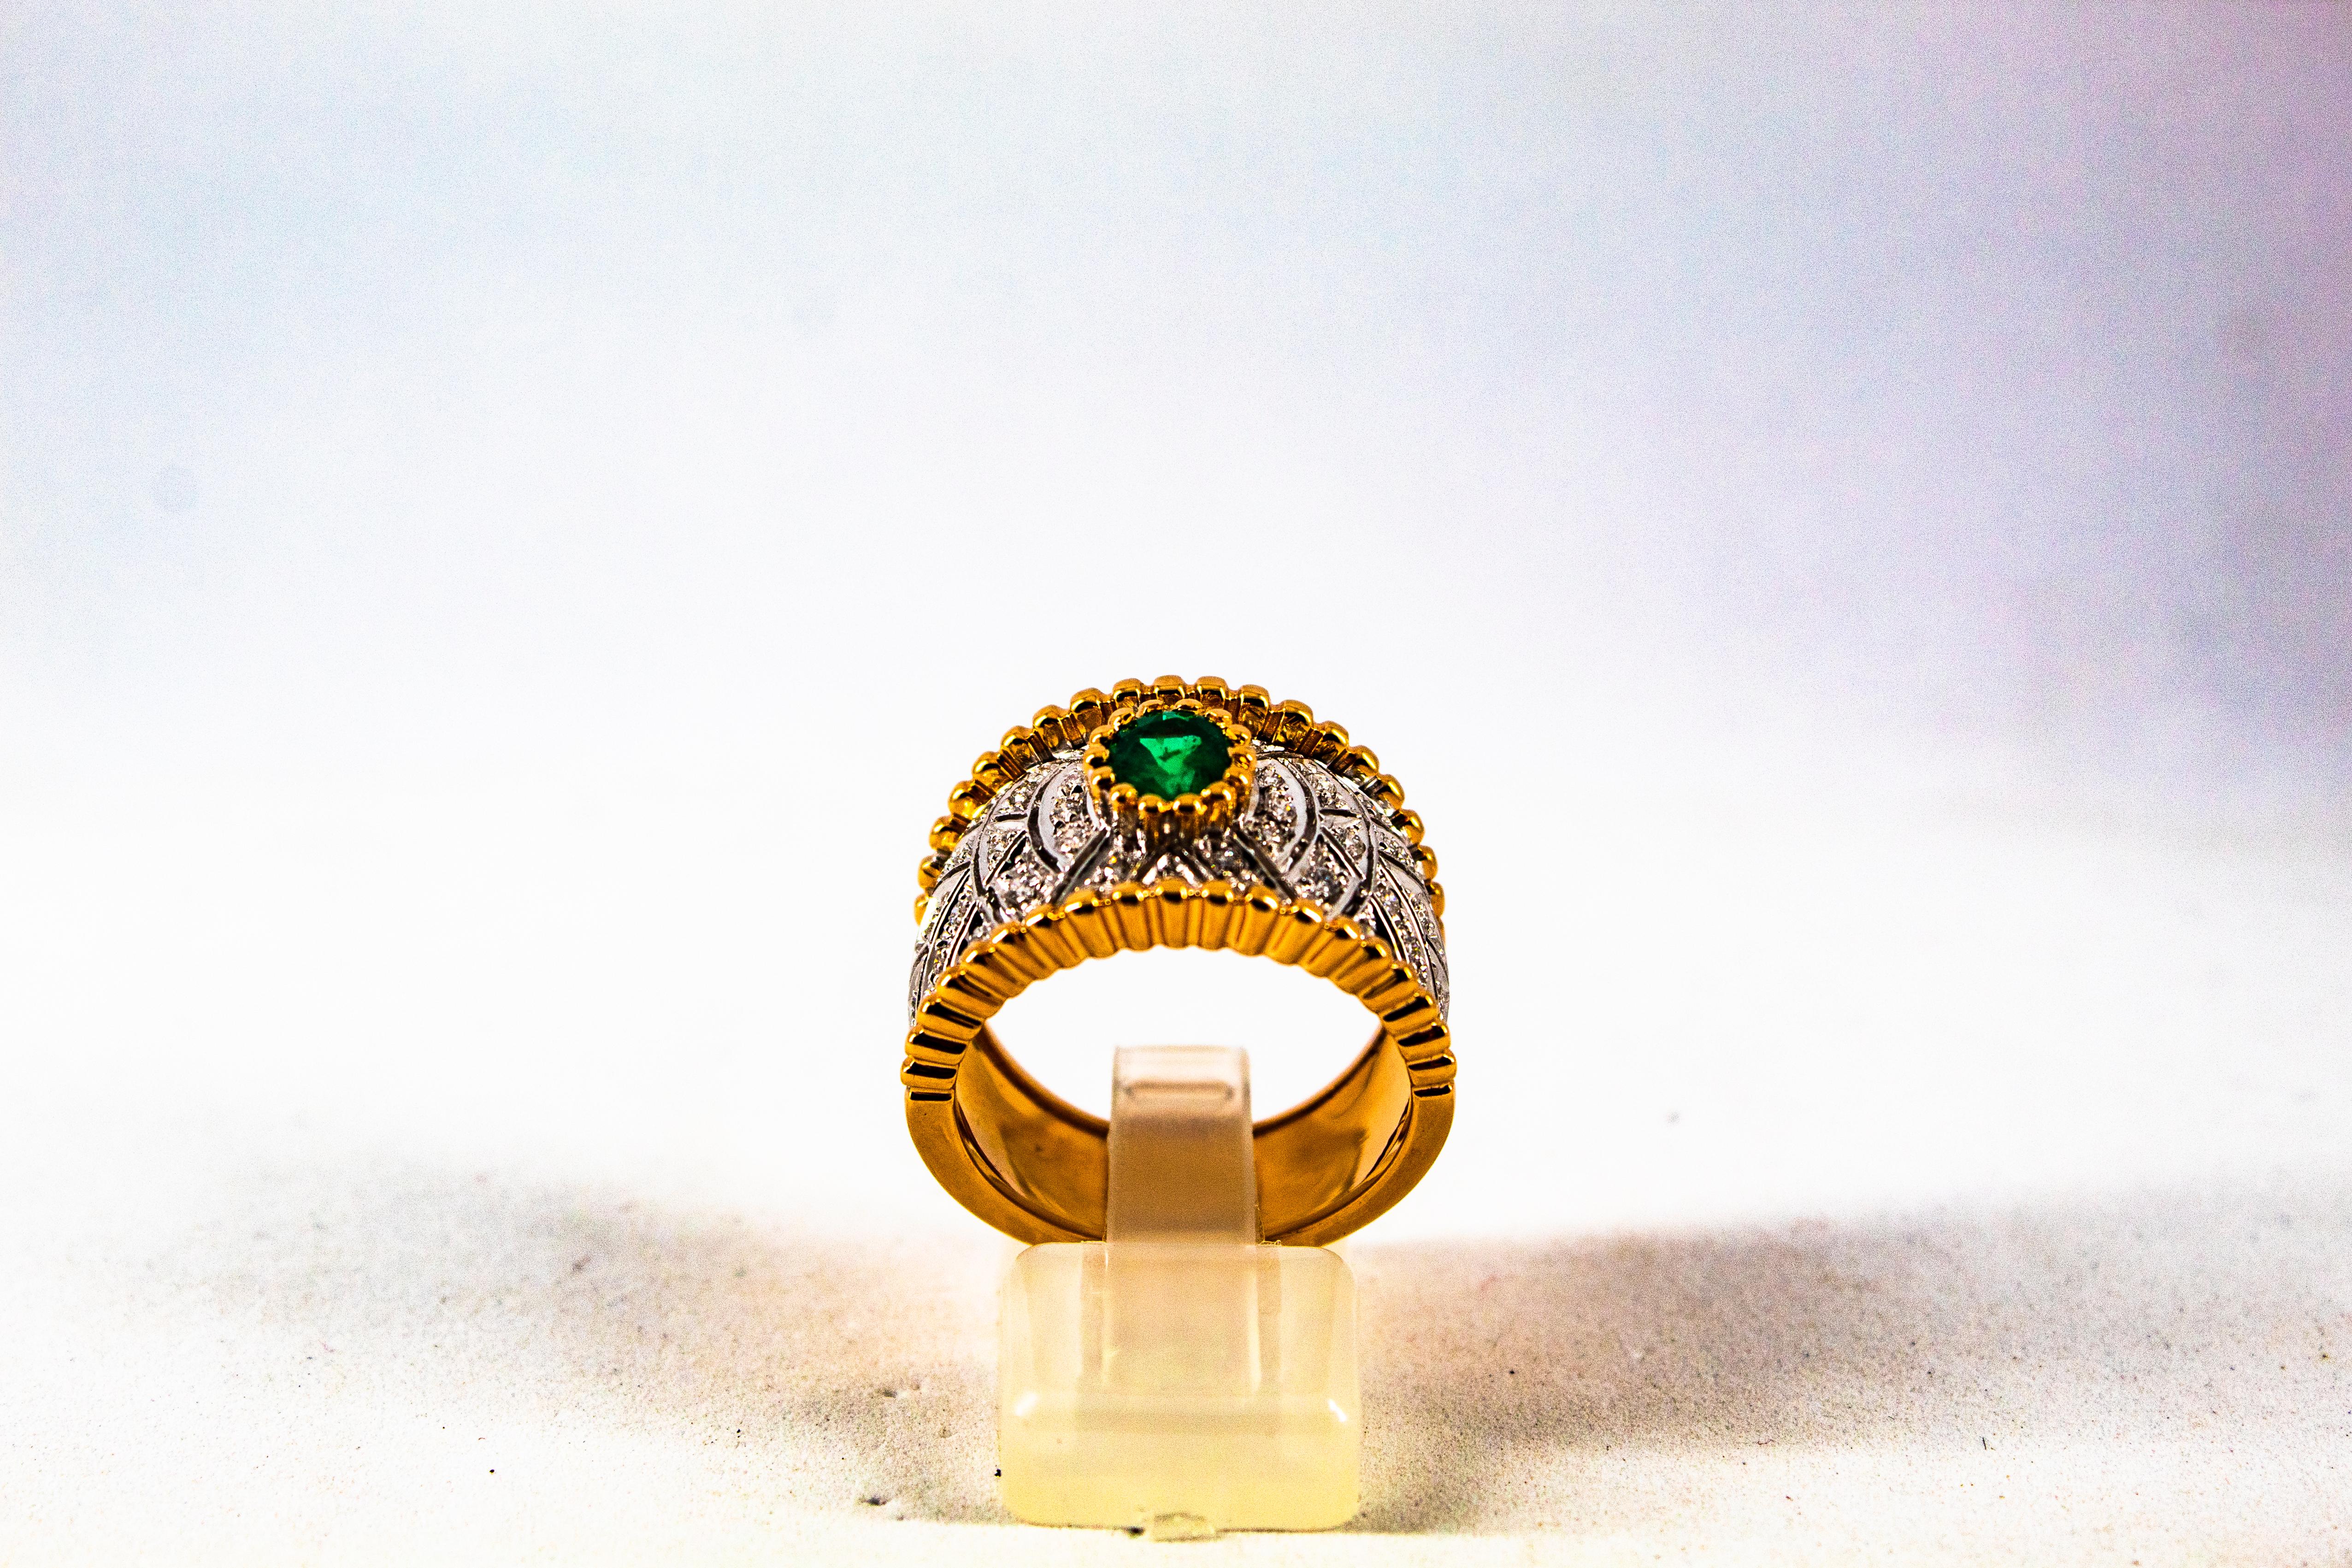 This Ring is made of 14K Yellow Gold.
This Ring has 0.50 Carats of White Modern Round Cut Diamonds.
This Ring has a 0.60 Carats Natural Oval Cut Emerald.
This Ring is available also with a central Ruby or Blue Sapphire.
Size ITA: 18 USA: 8 1/4
We're